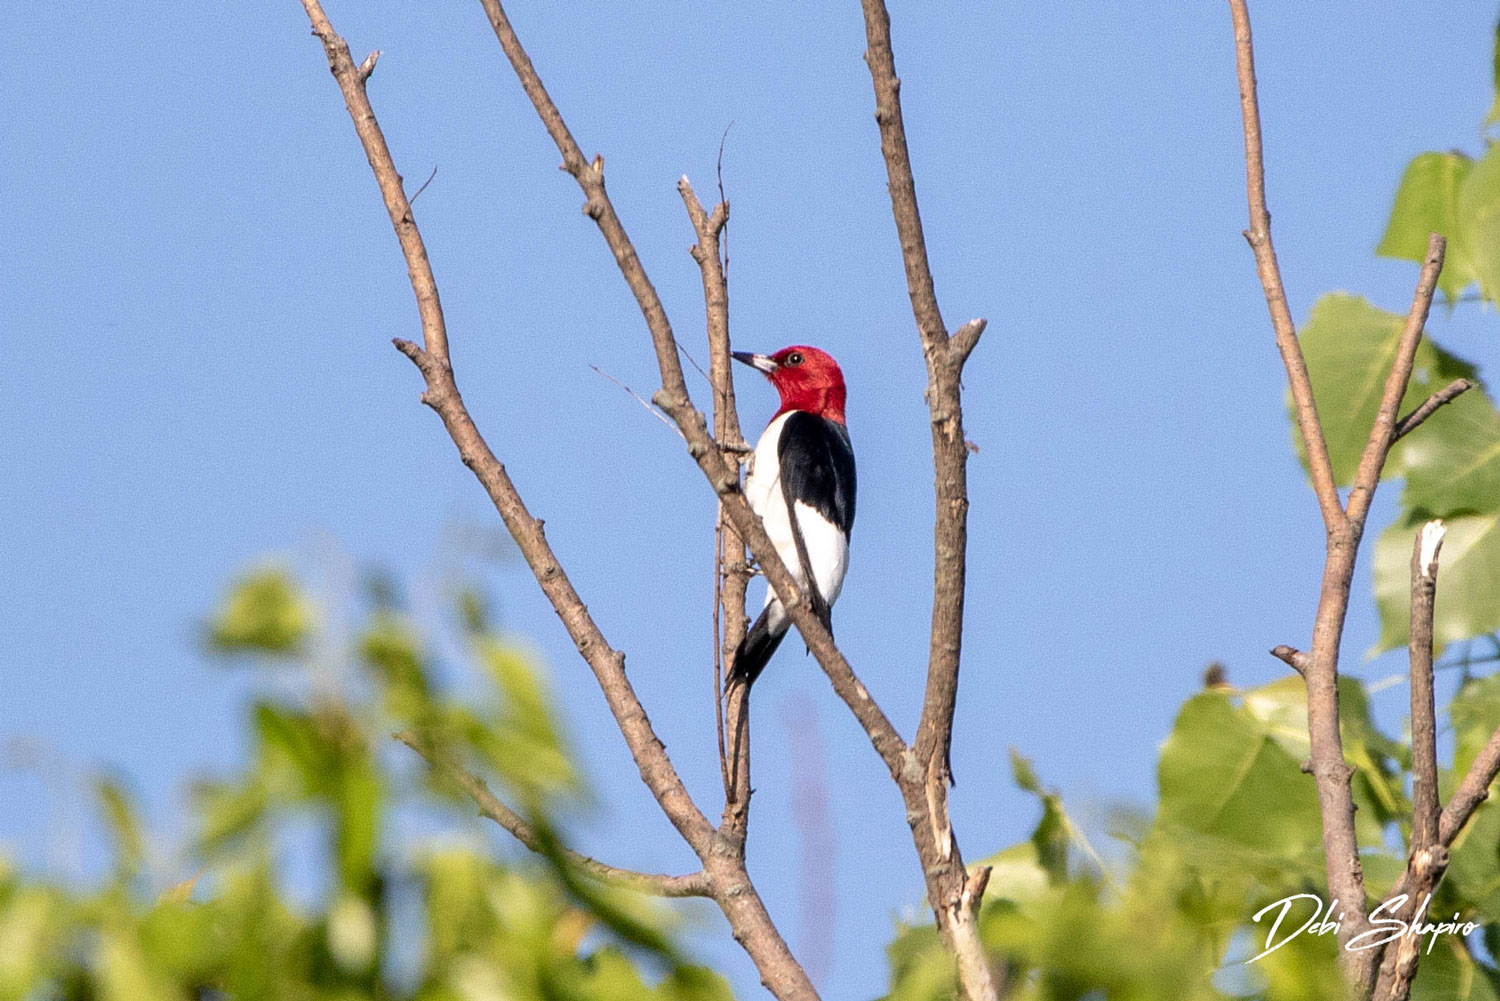 Red-headed woodpecker perched on a branch